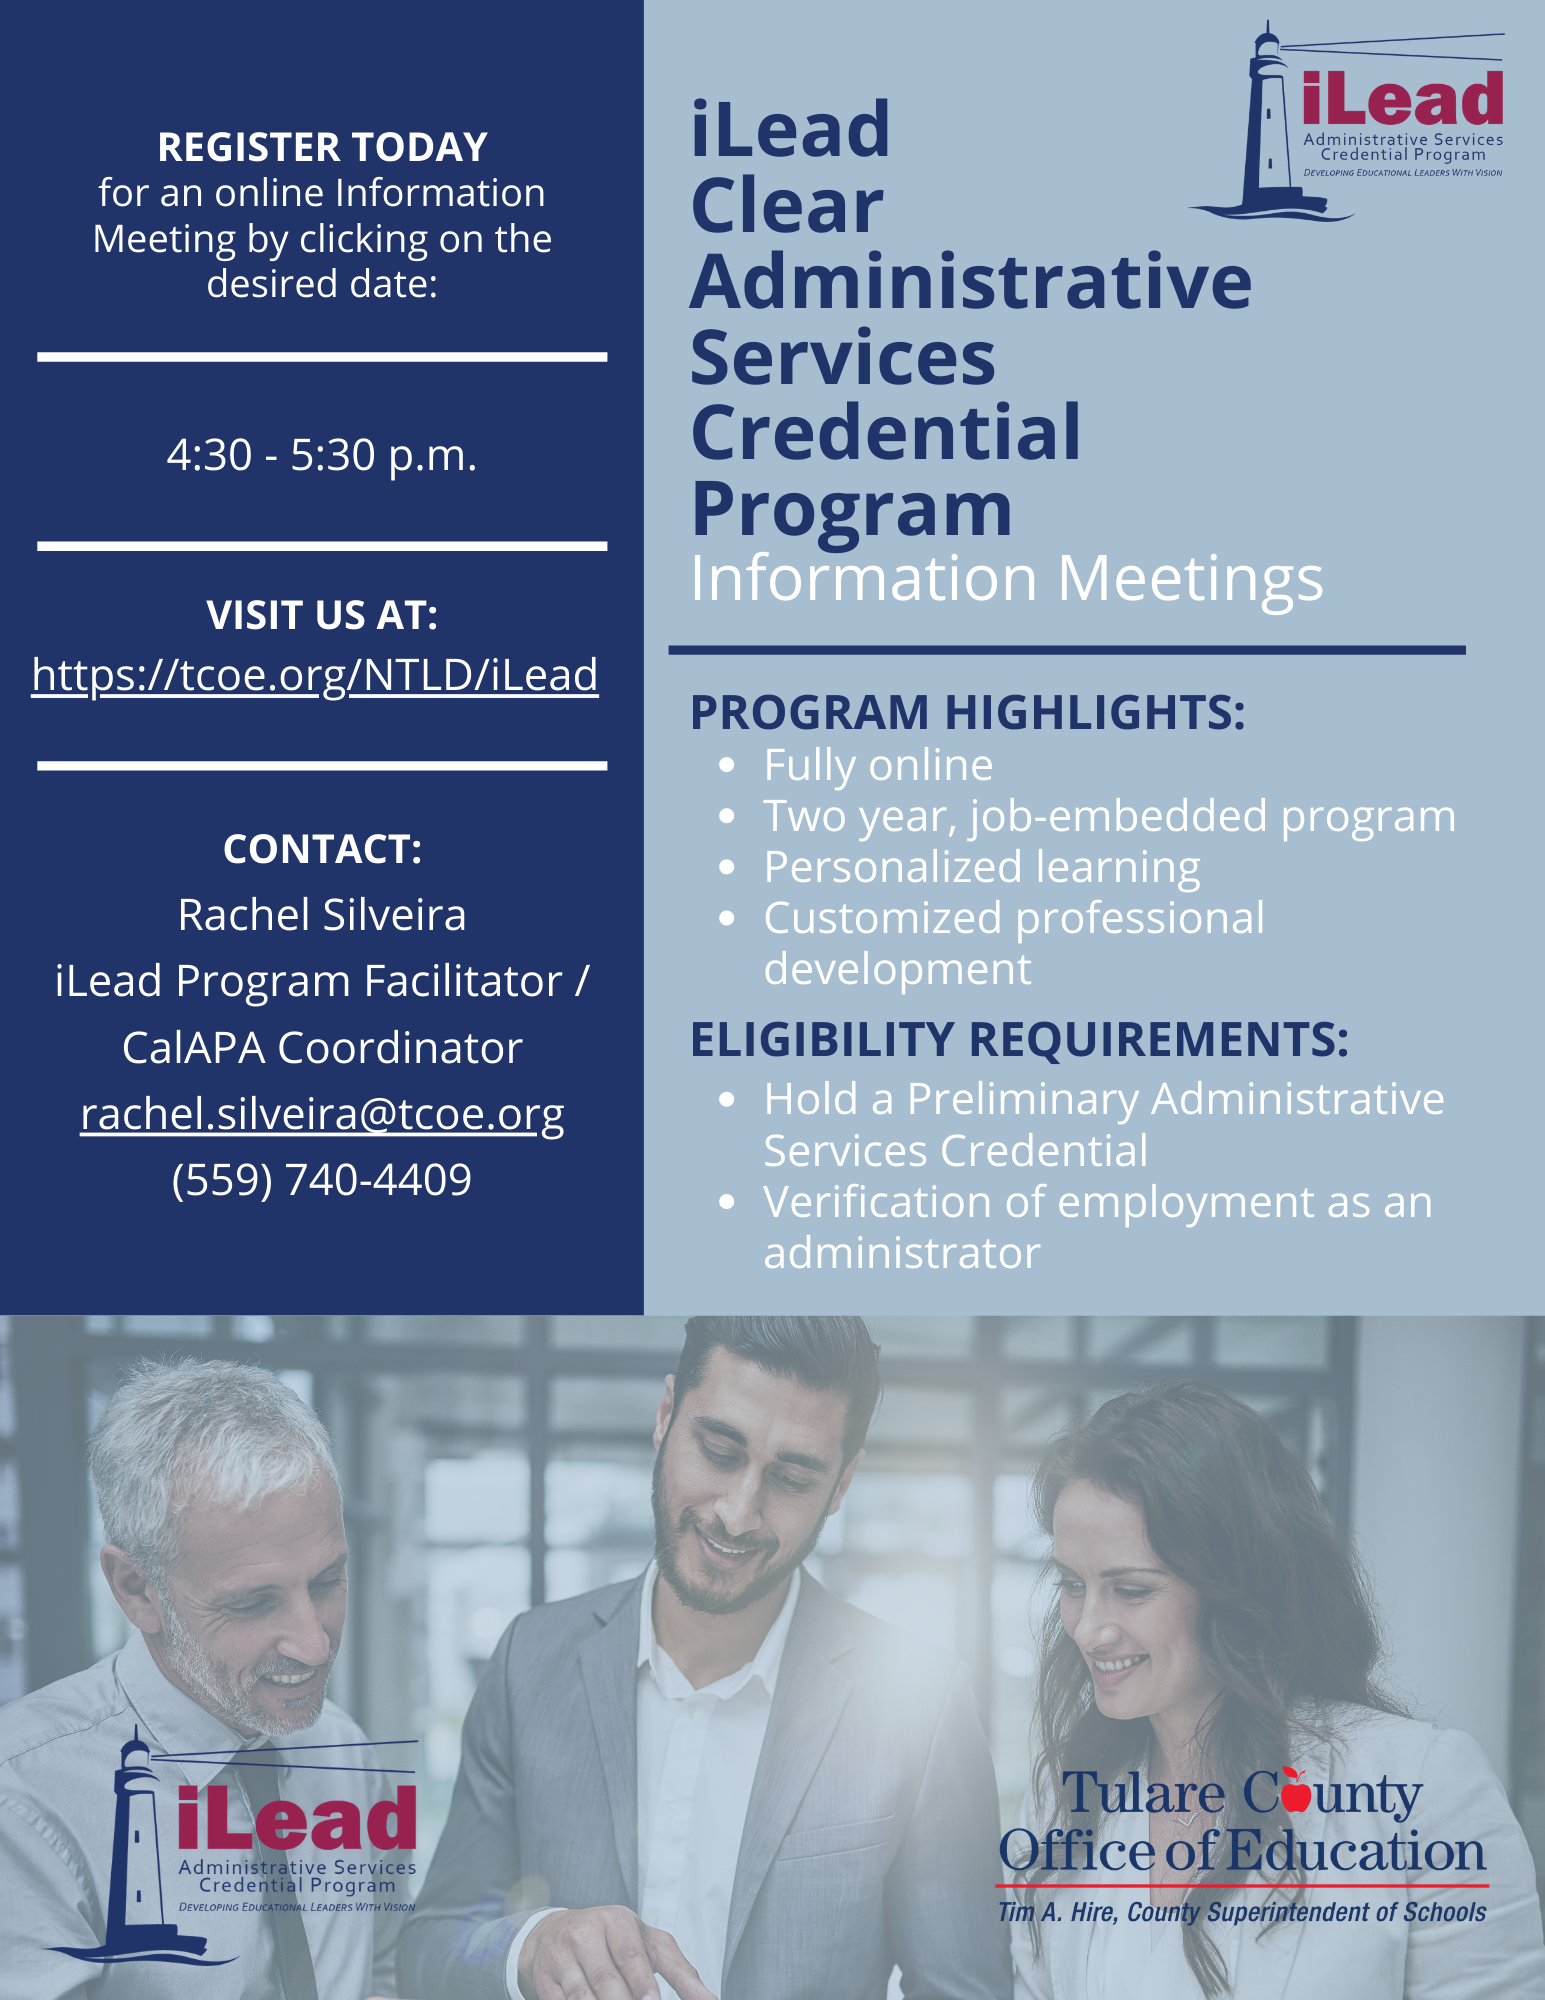 The image is a link to register for an iLead Clear Administrative Services Credential Program Information Meeting.